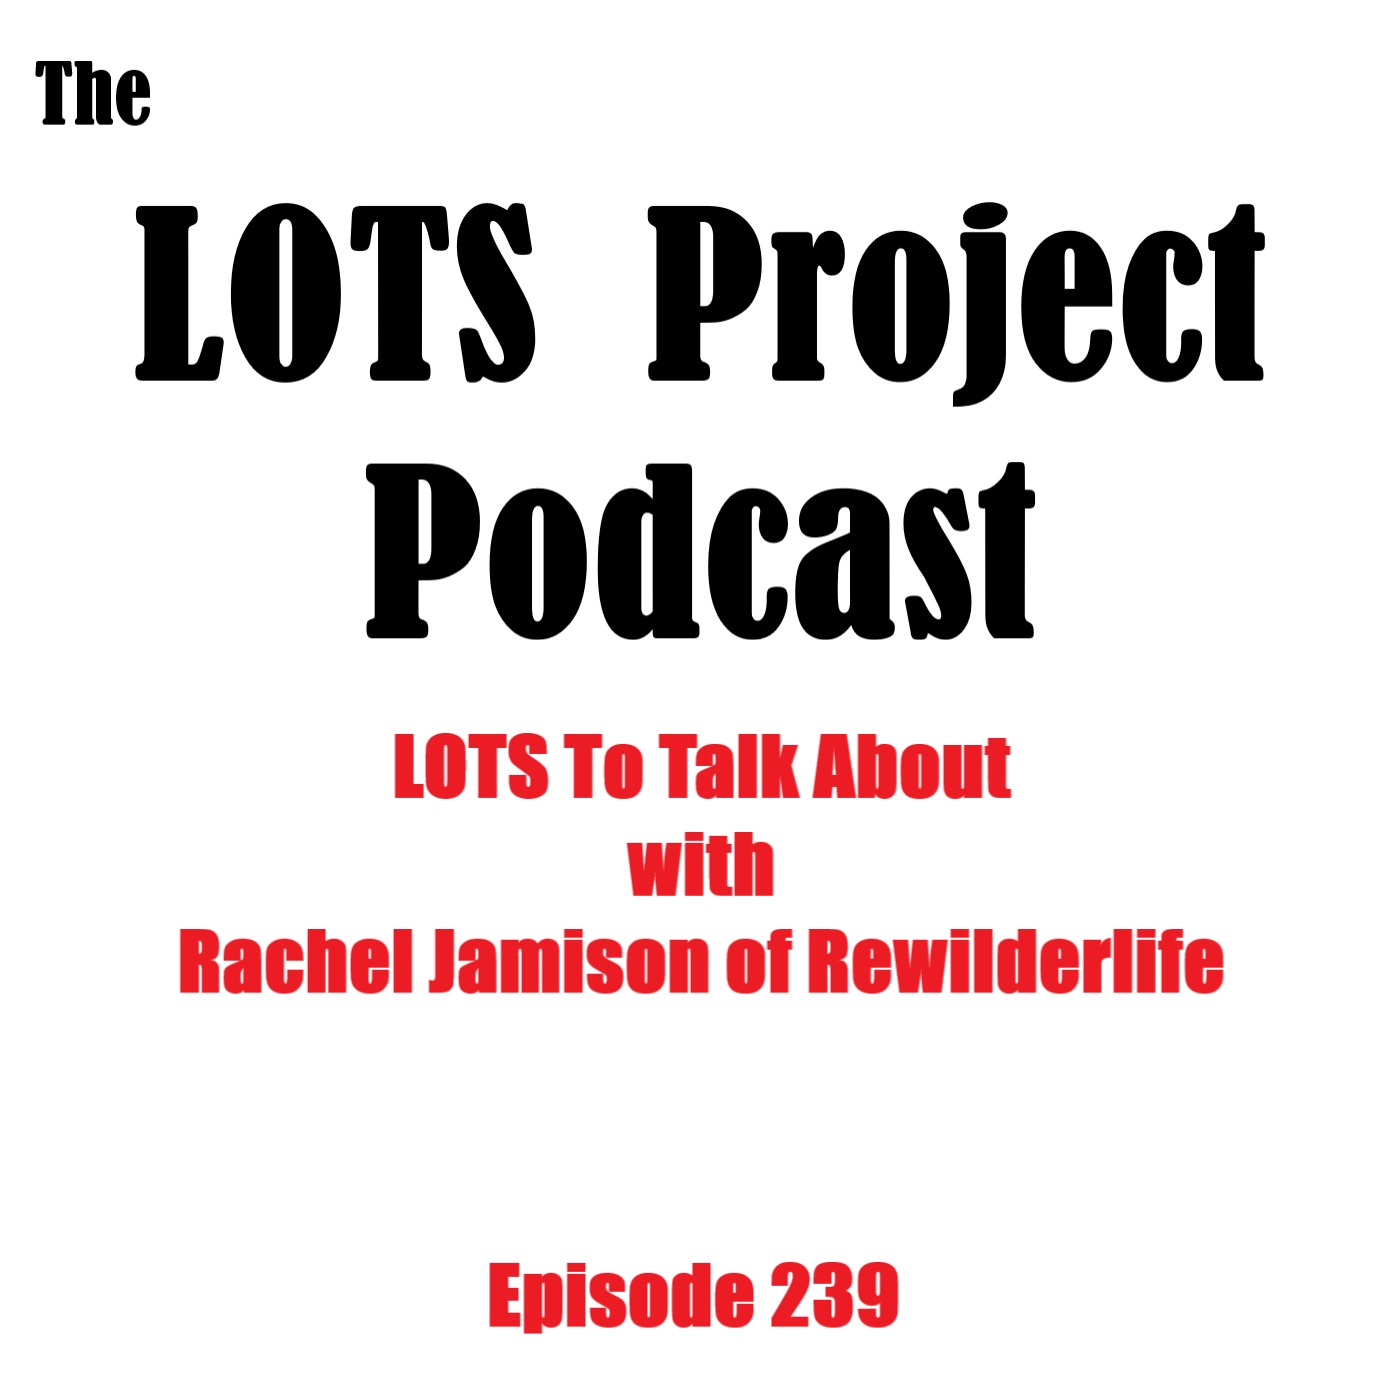 LOTS To Talk About with Rachel Jamison of Rewilderlife